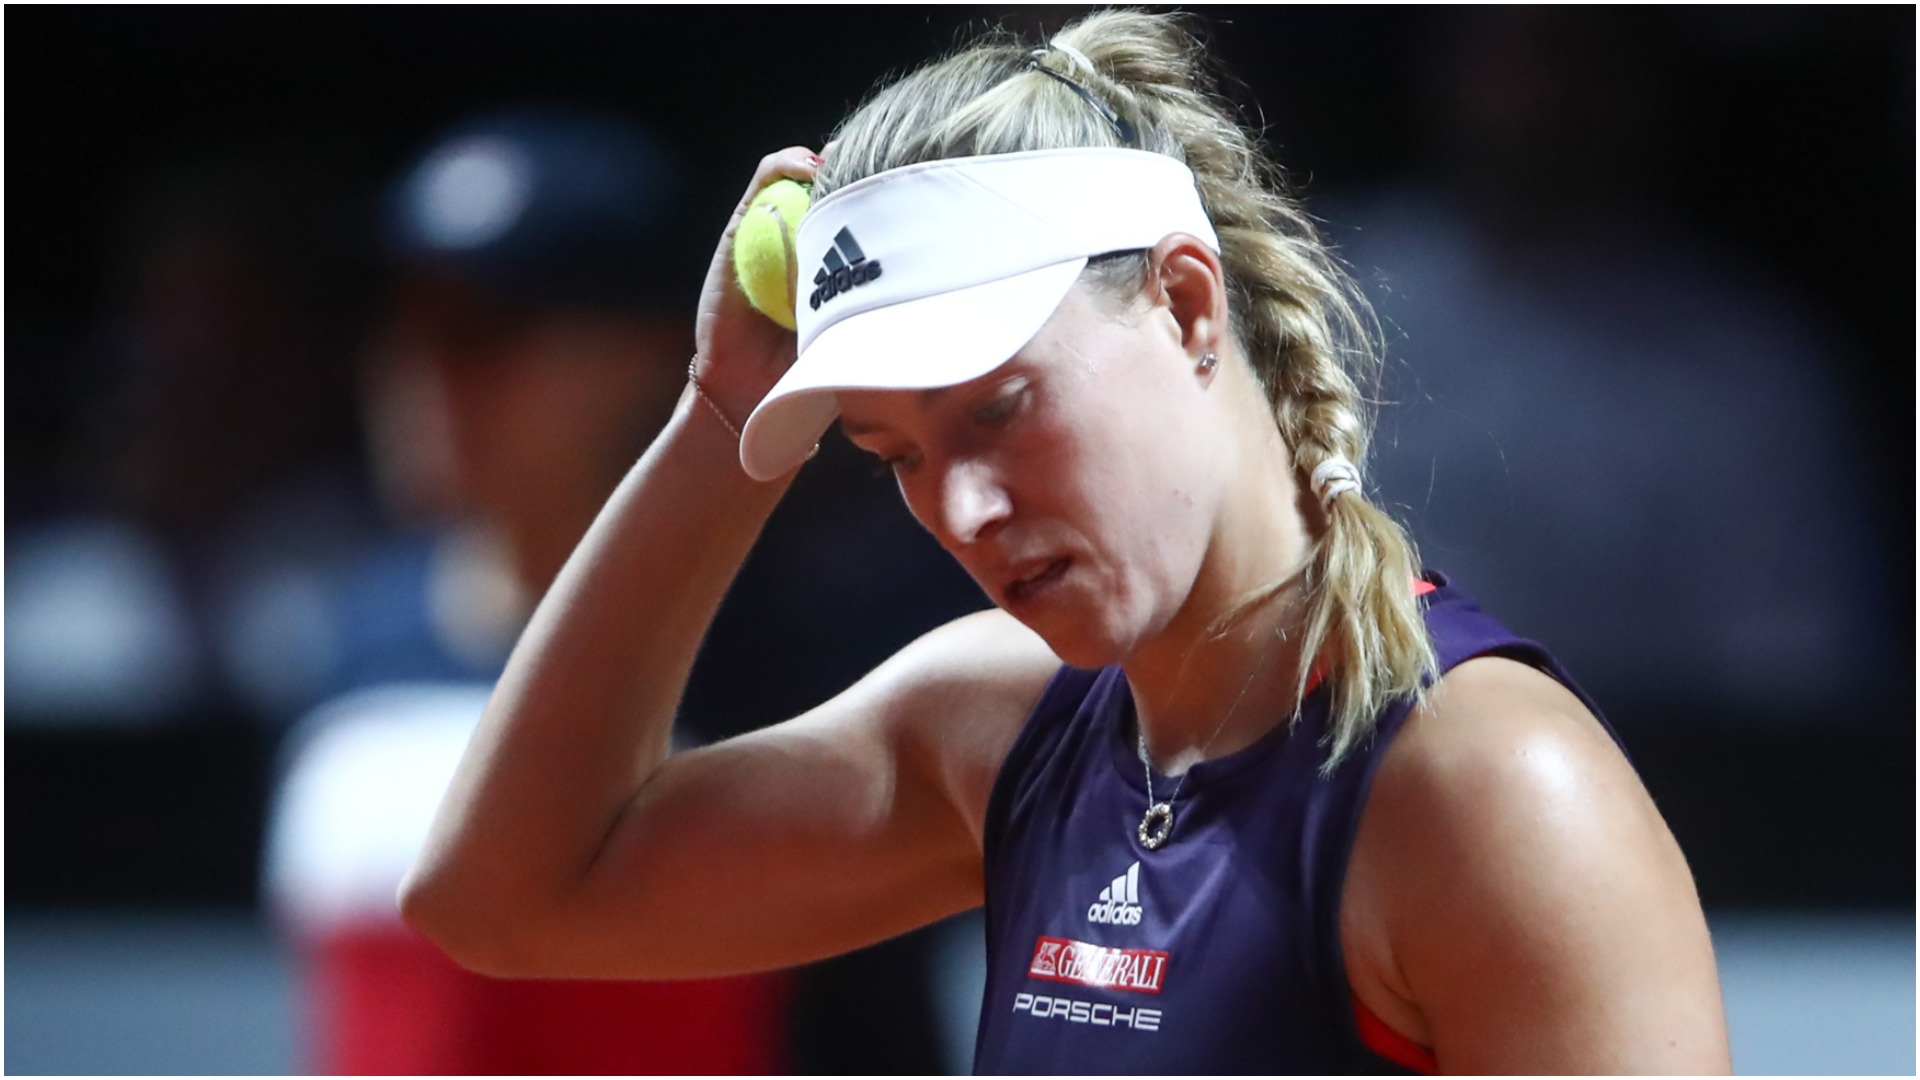 Anastasia Potapova delivered the victory of her career, ending Angelique Kerber's bid to complete a career Grand Slam in 2019.